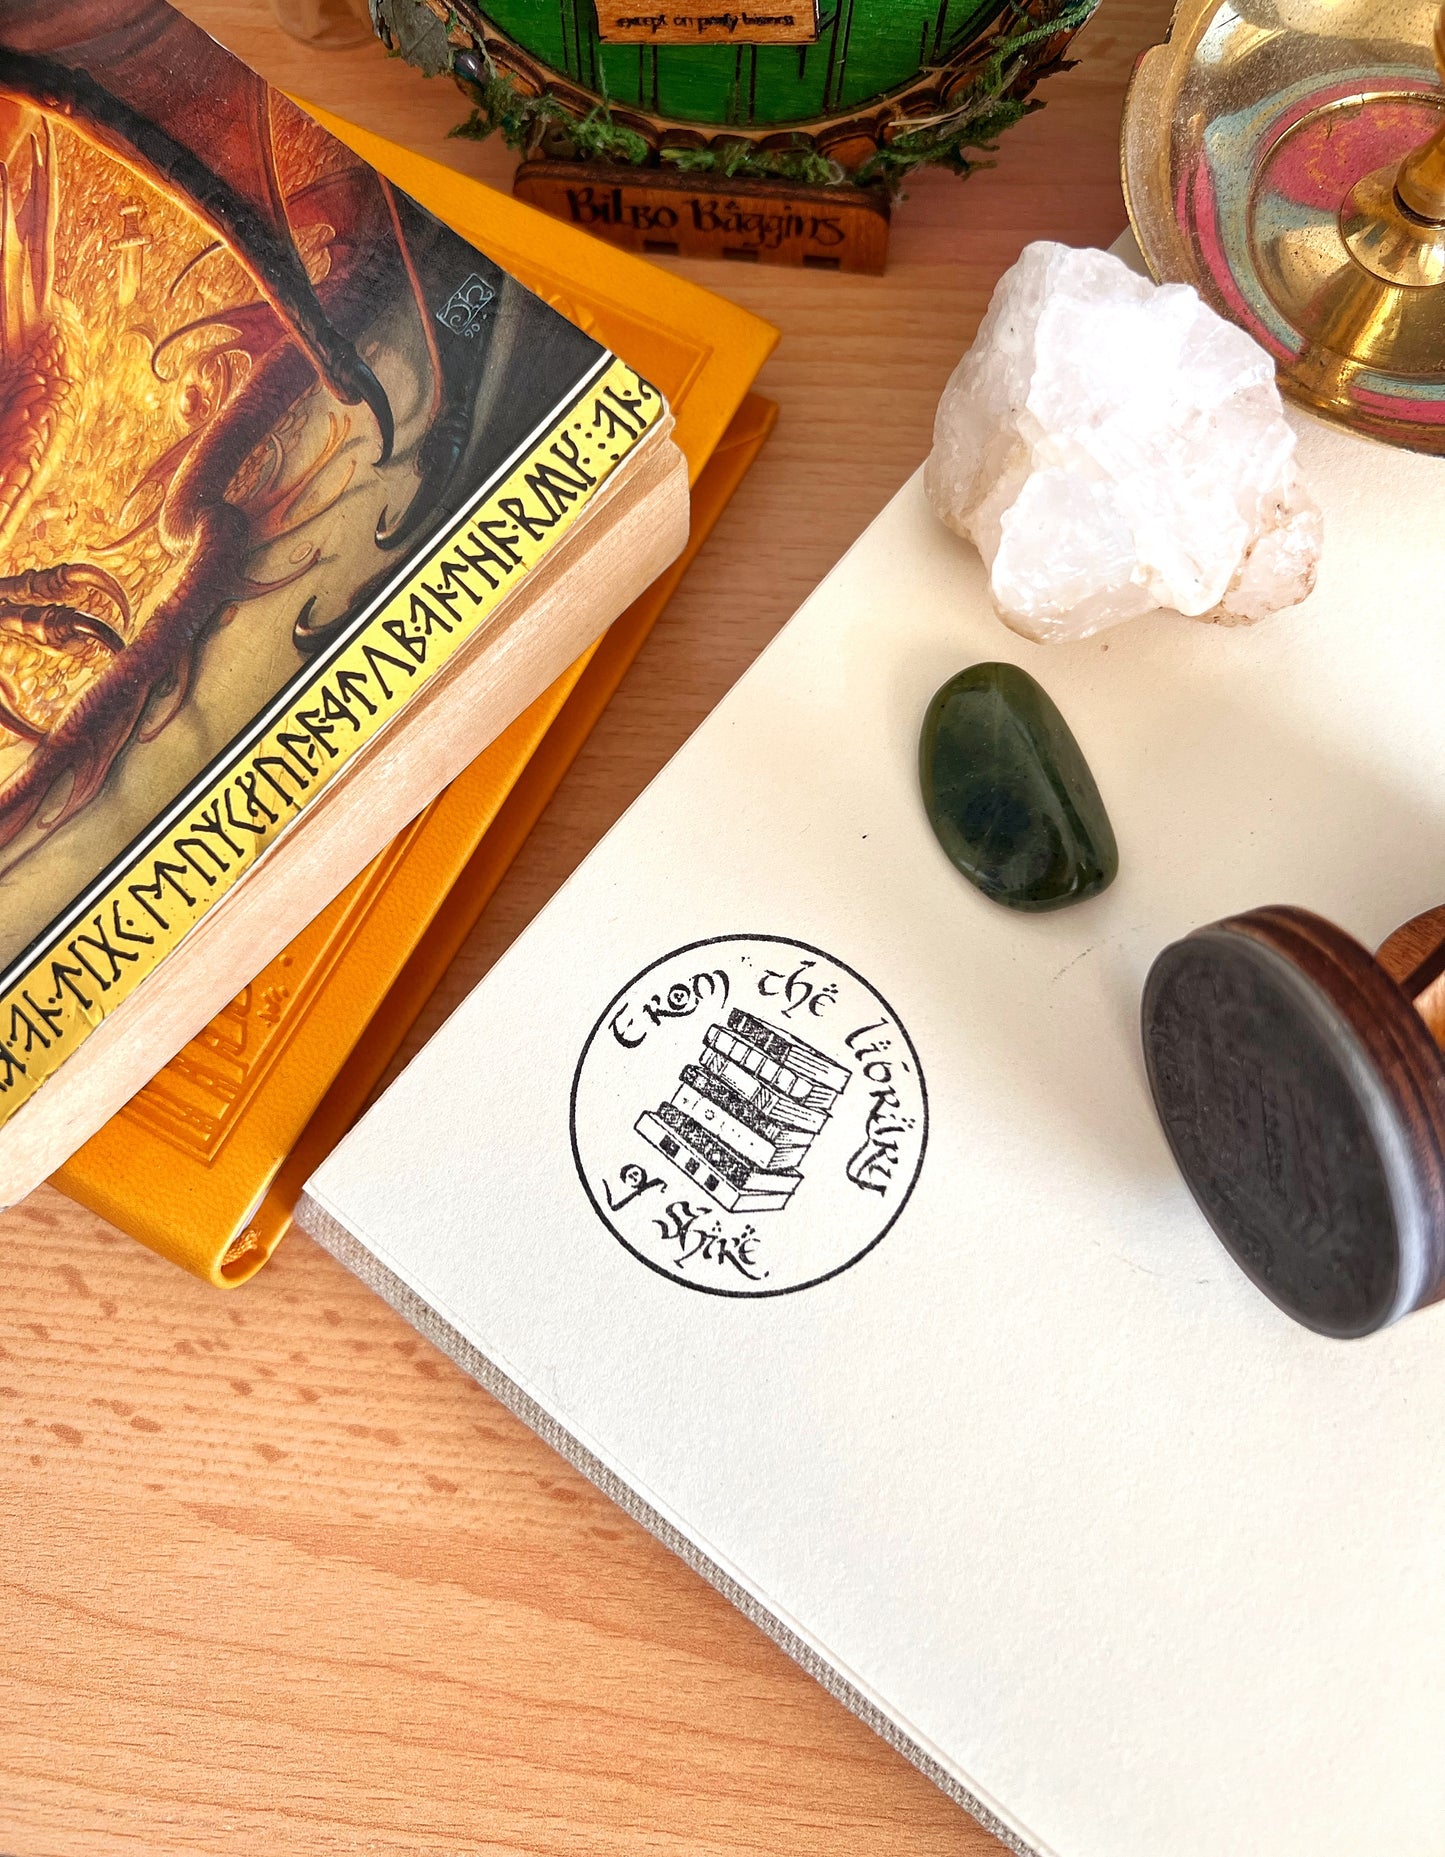 Bookish rubber stamps